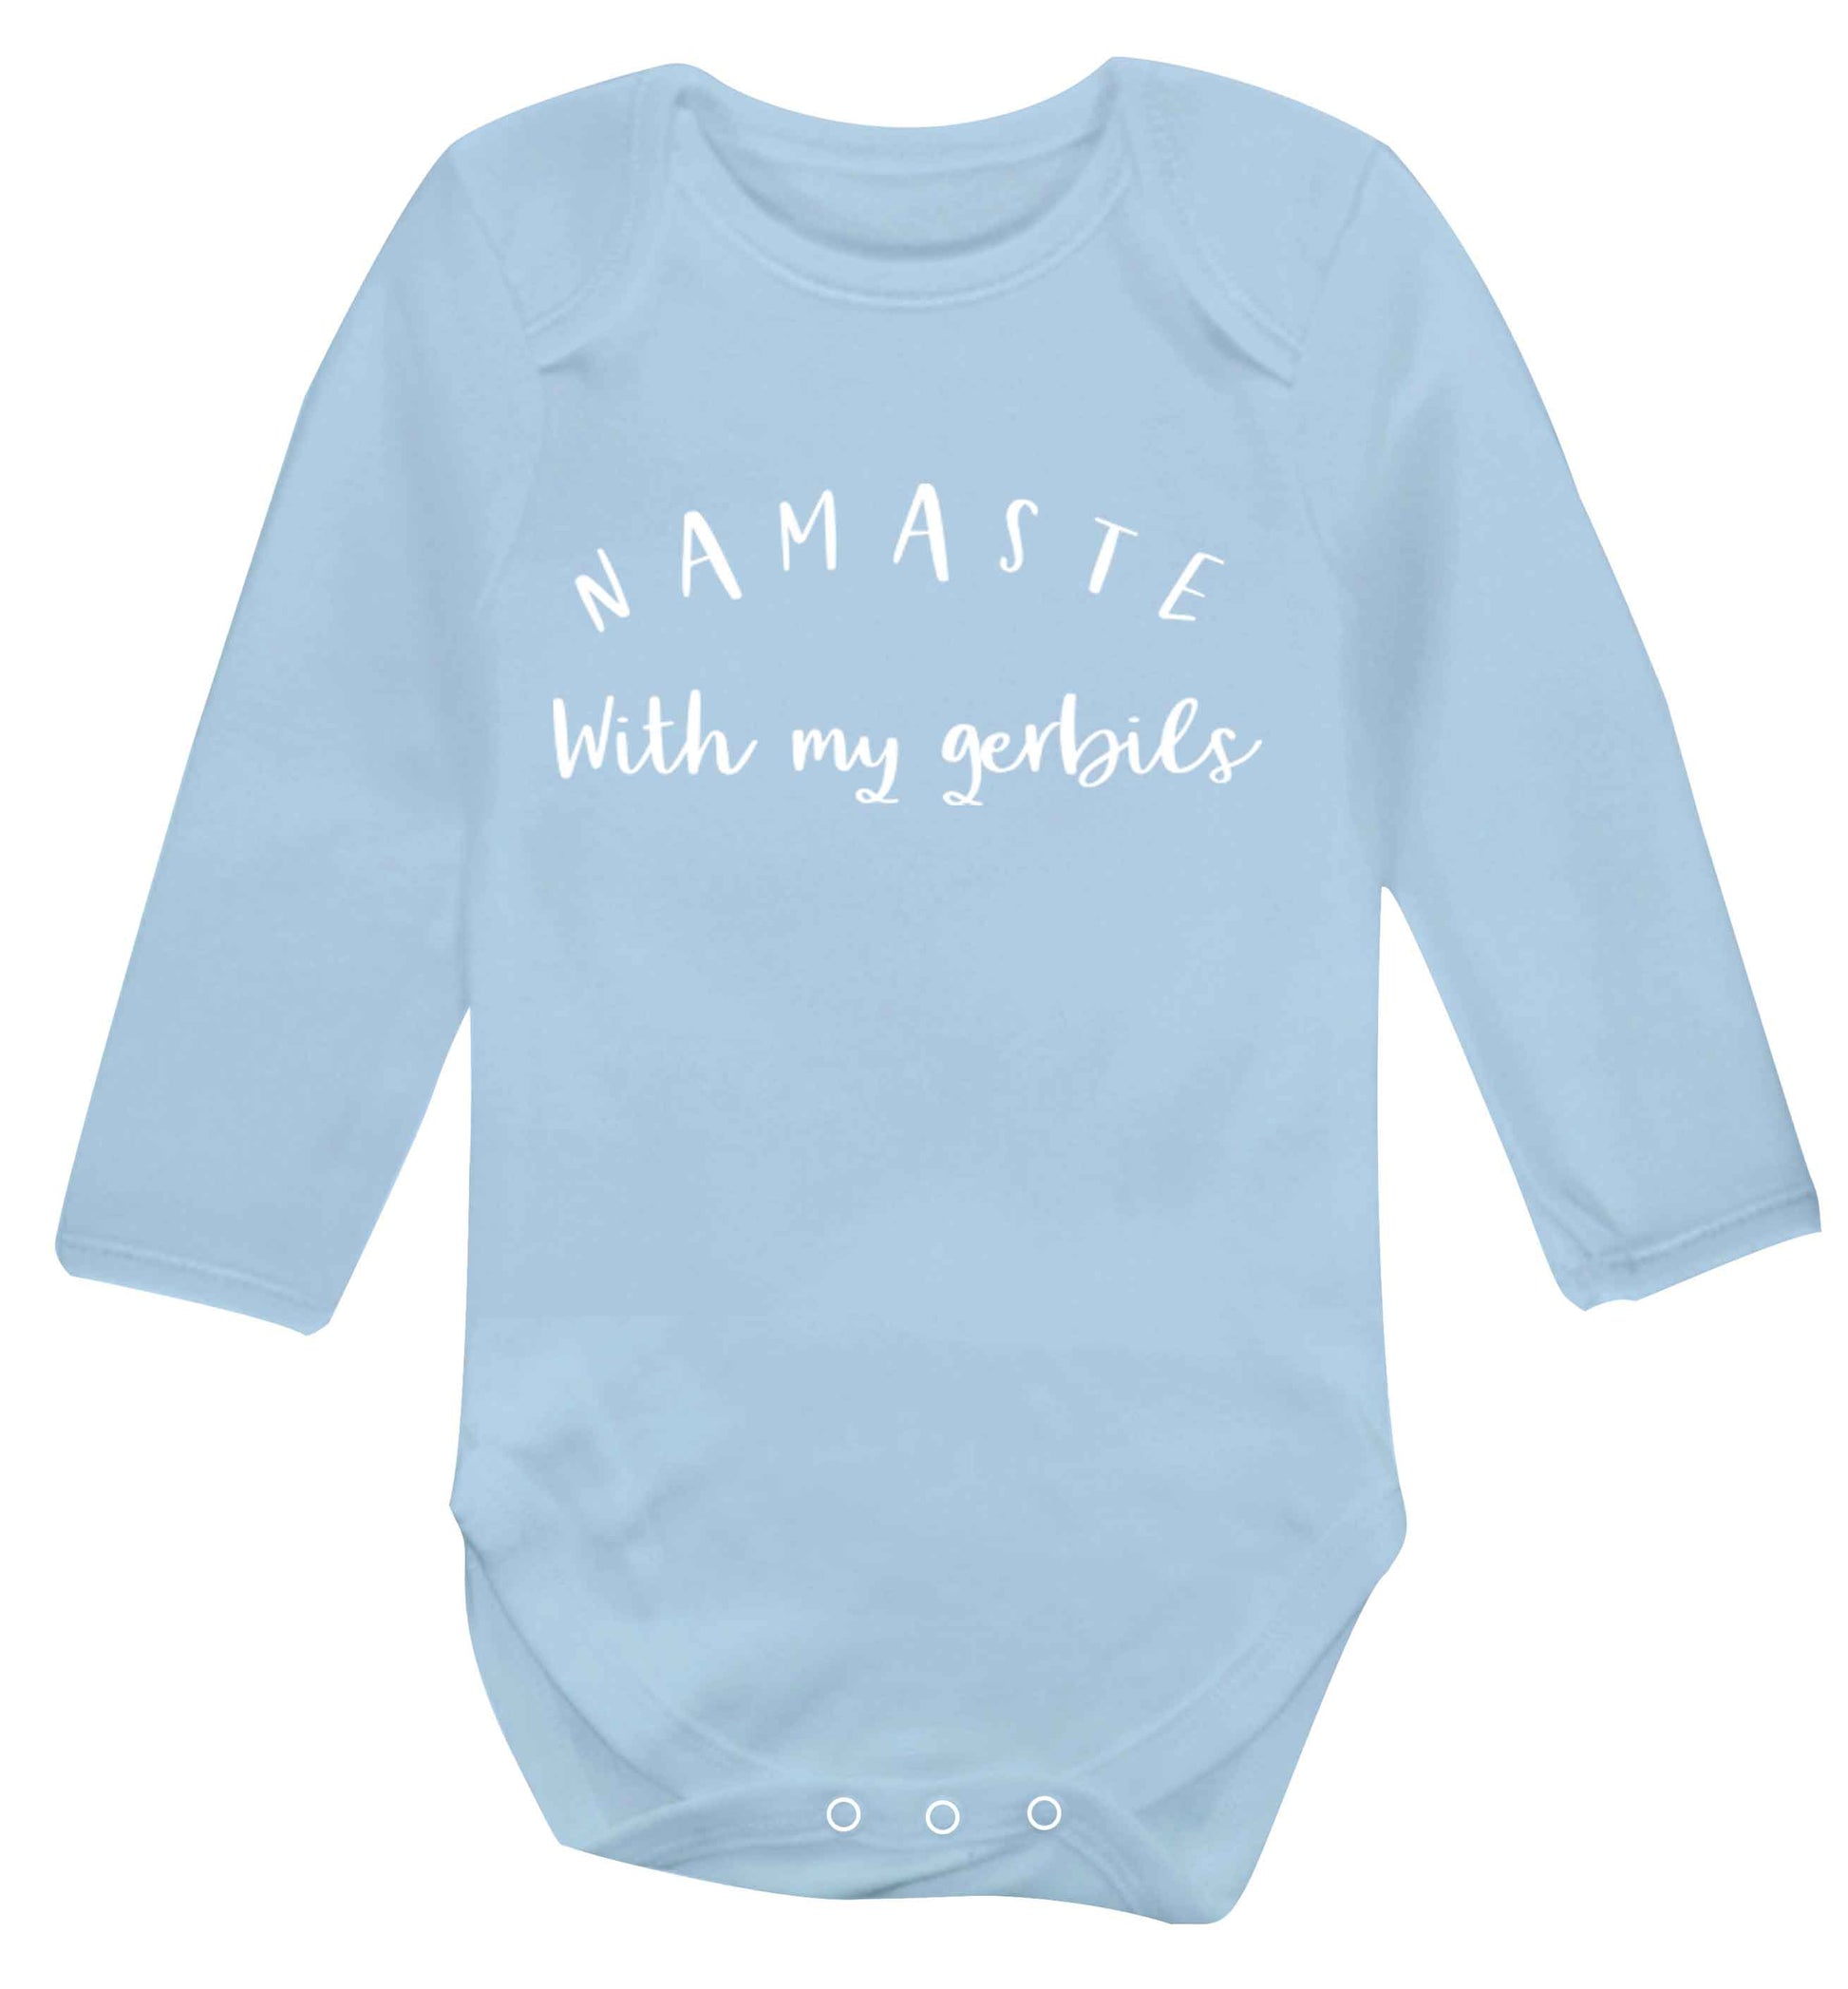 Namaste with my gerbils Baby Vest long sleeved pale blue 6-12 months